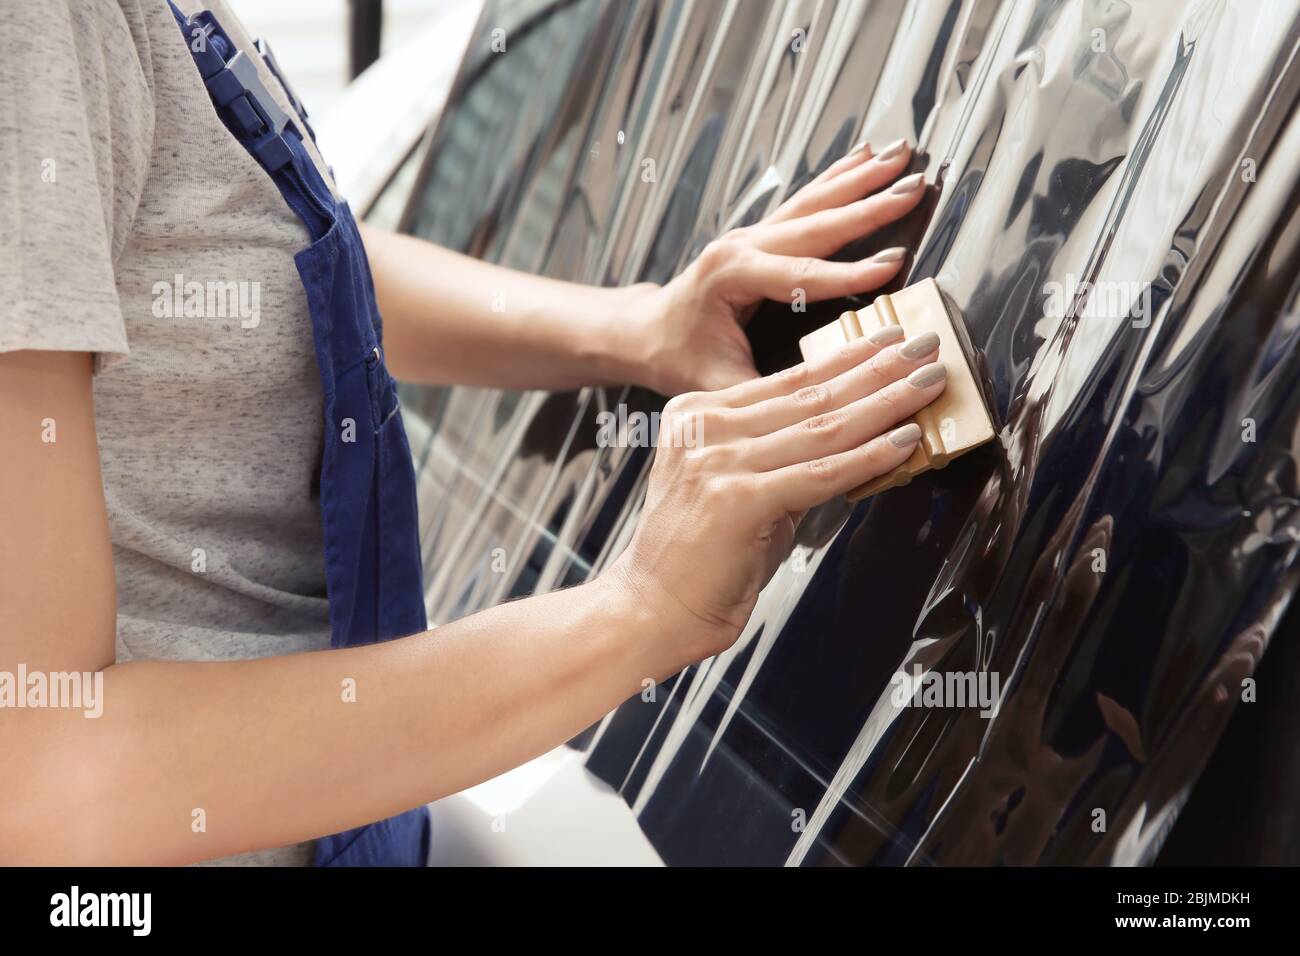 Female worker applying tinting foil onto car window in shop Stock Photo